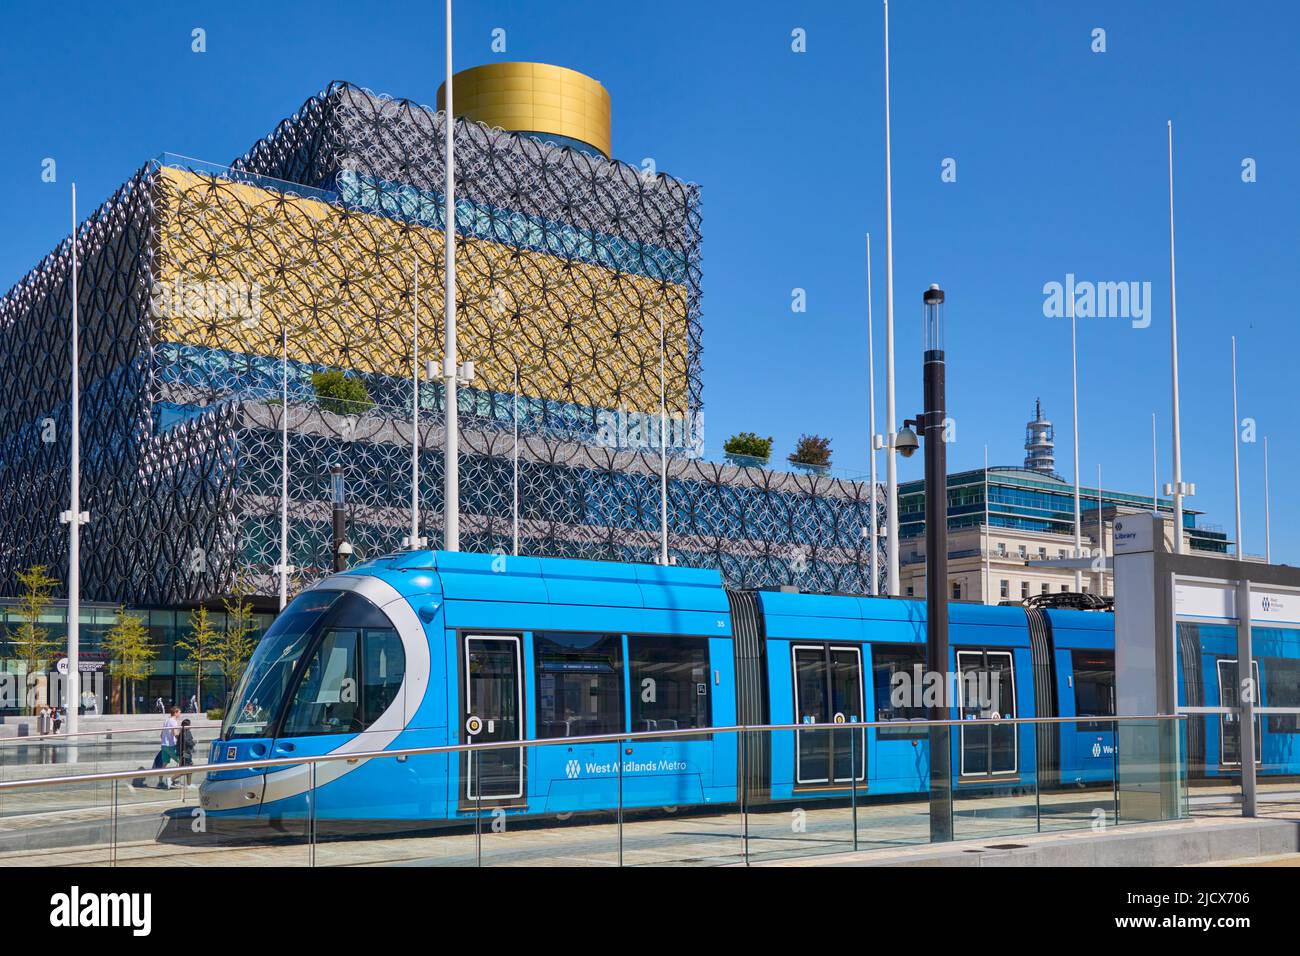 Tram in front of Library, Centenary Square, Birmingham, West Midlands, England, United Kingdom, Europe Stock Photo